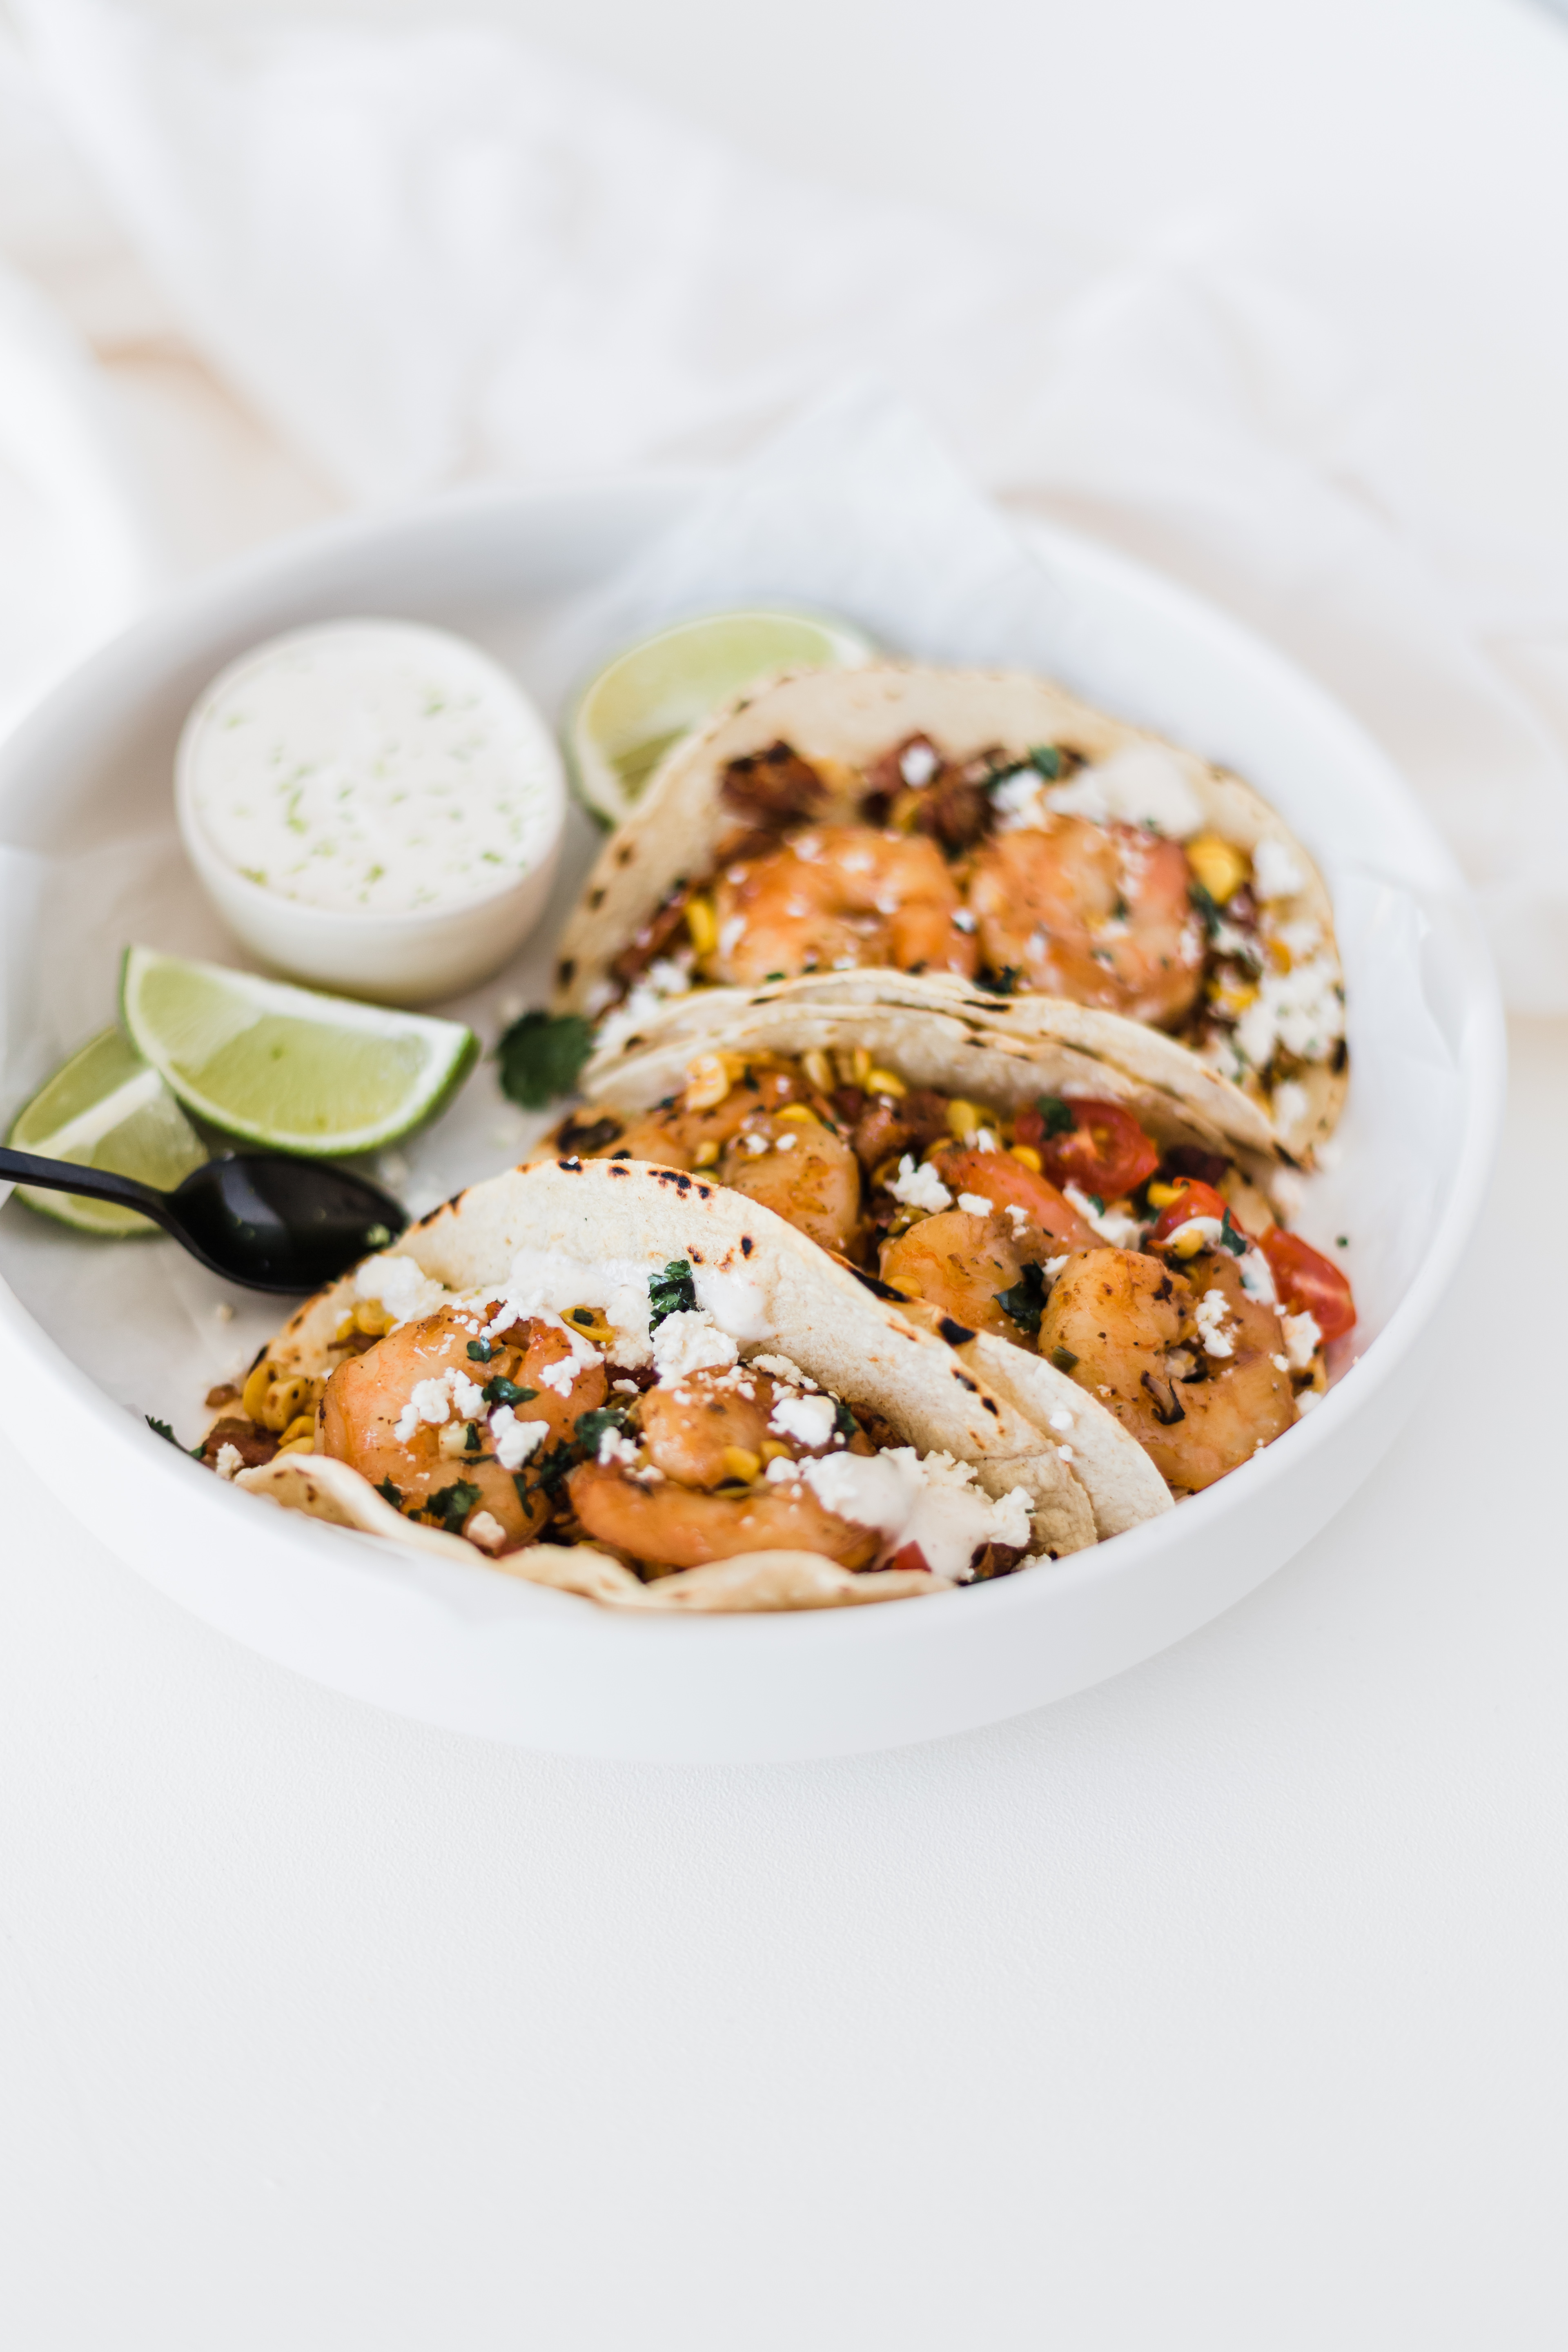 Shrimp & Bacon Tacos with Corn and Lime Crema